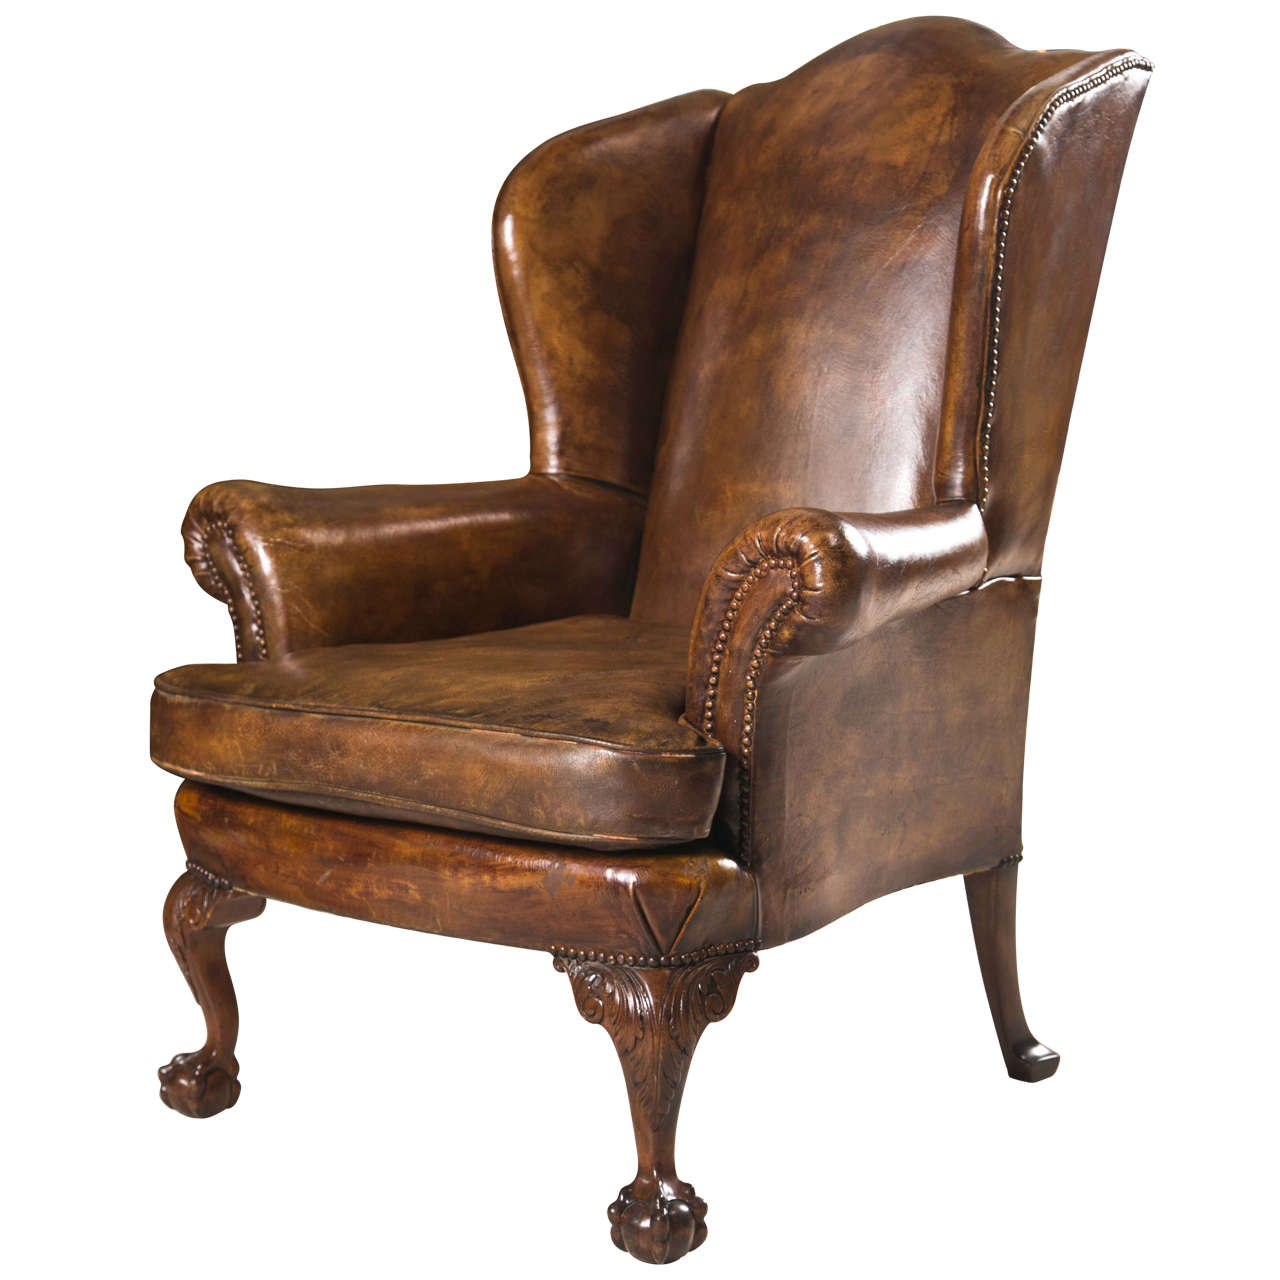 Late 19th C Leather Wingback Chair with Ball and Claw Feet